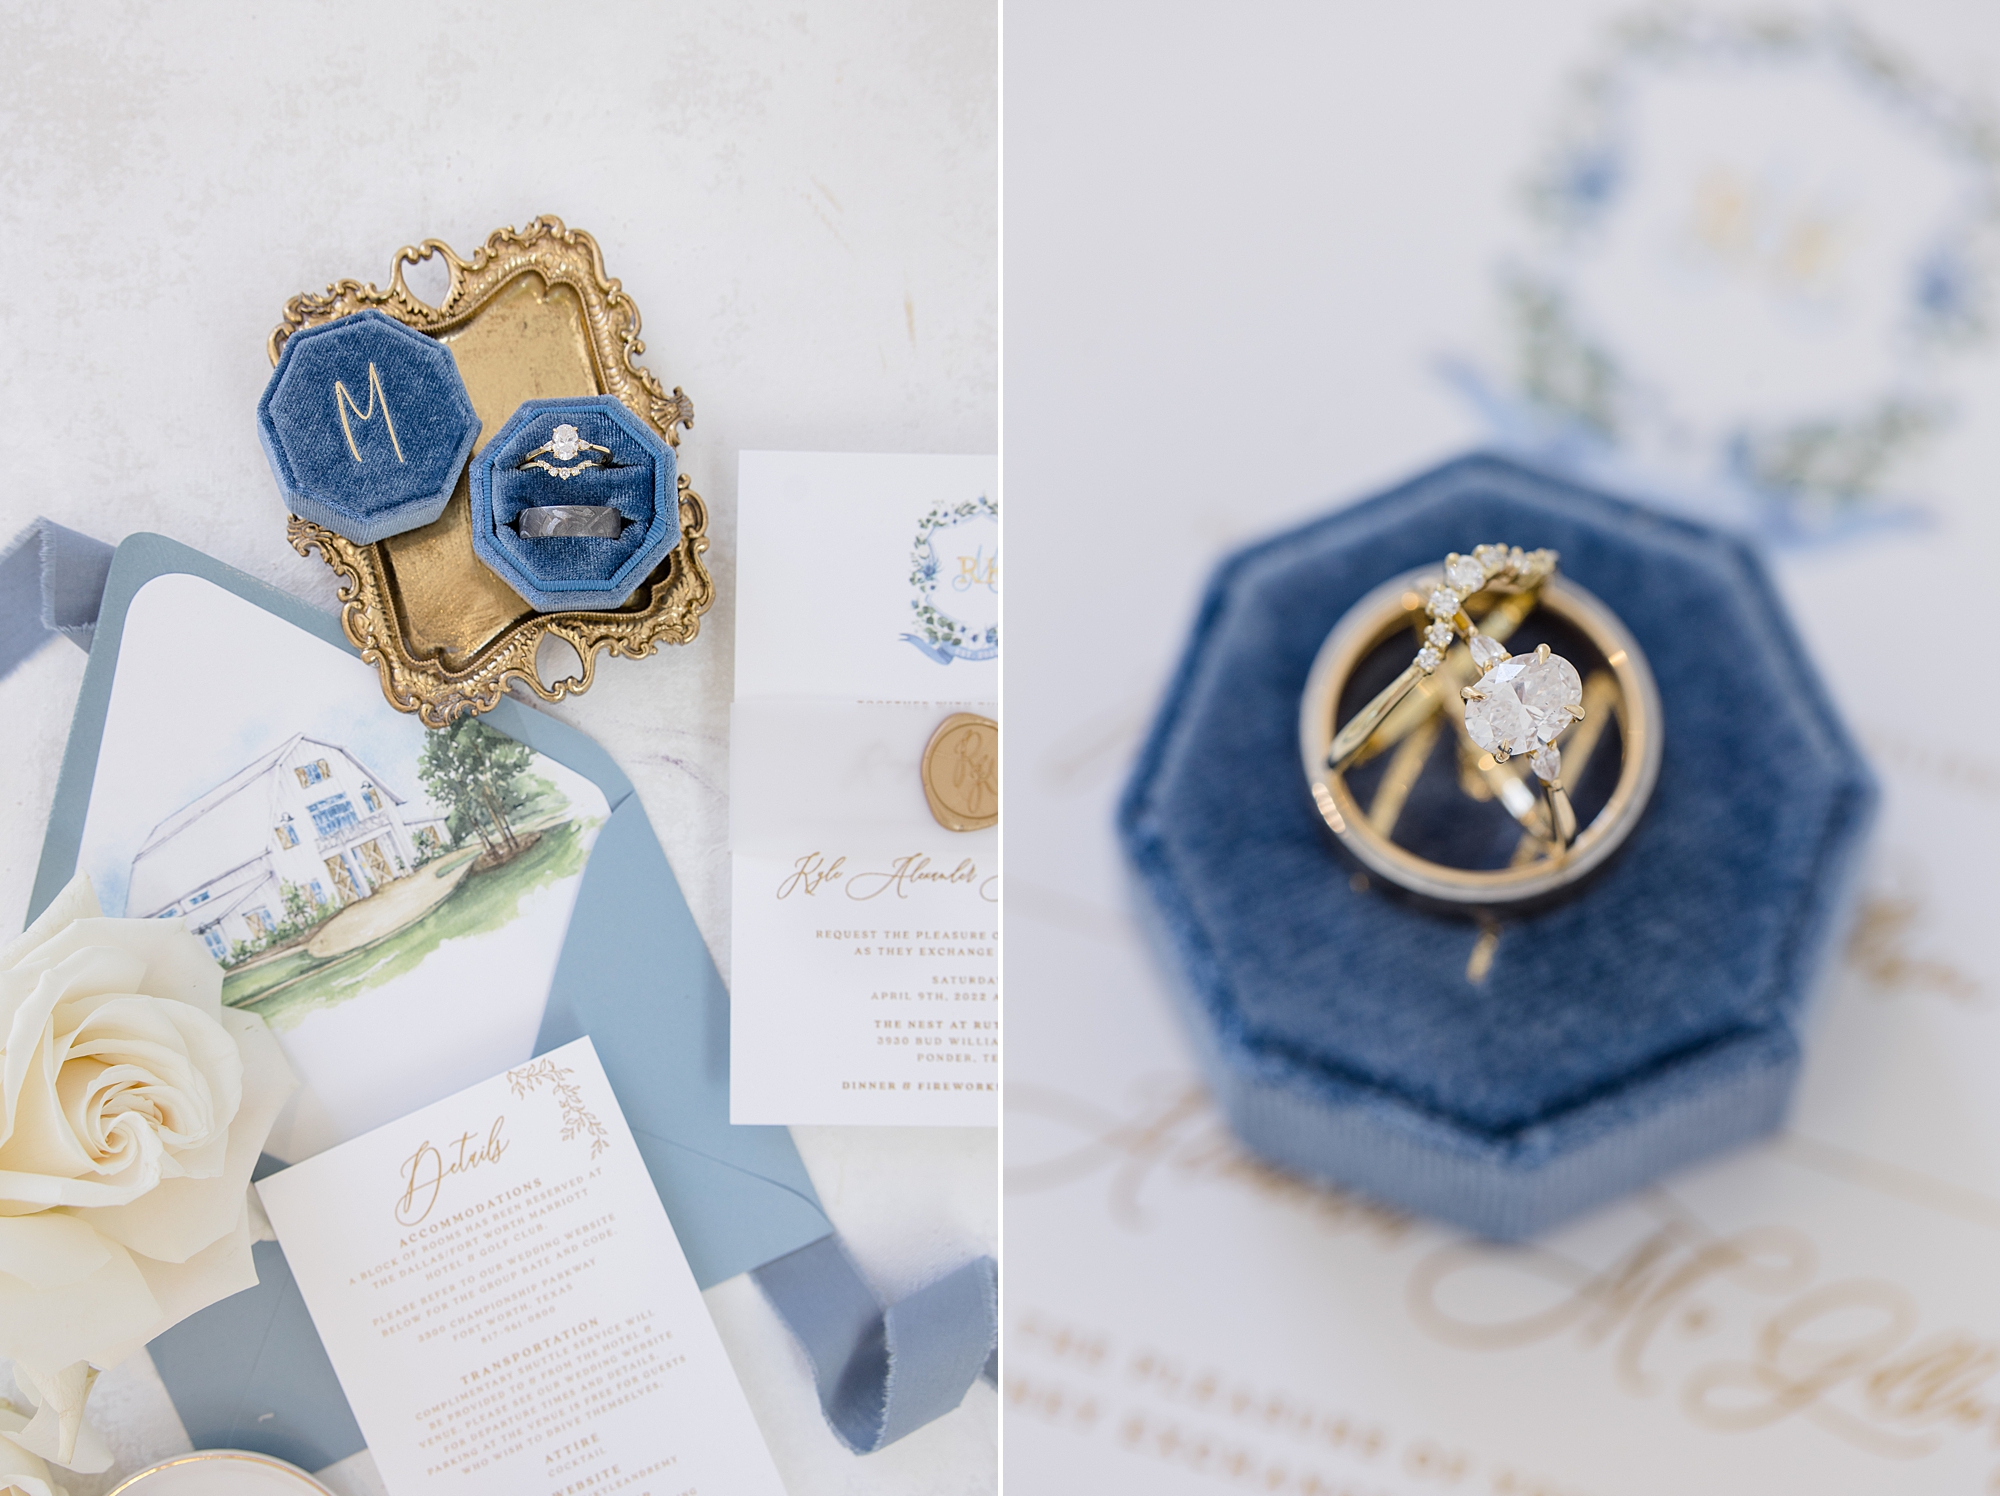 wedding rings rest in blue ring box